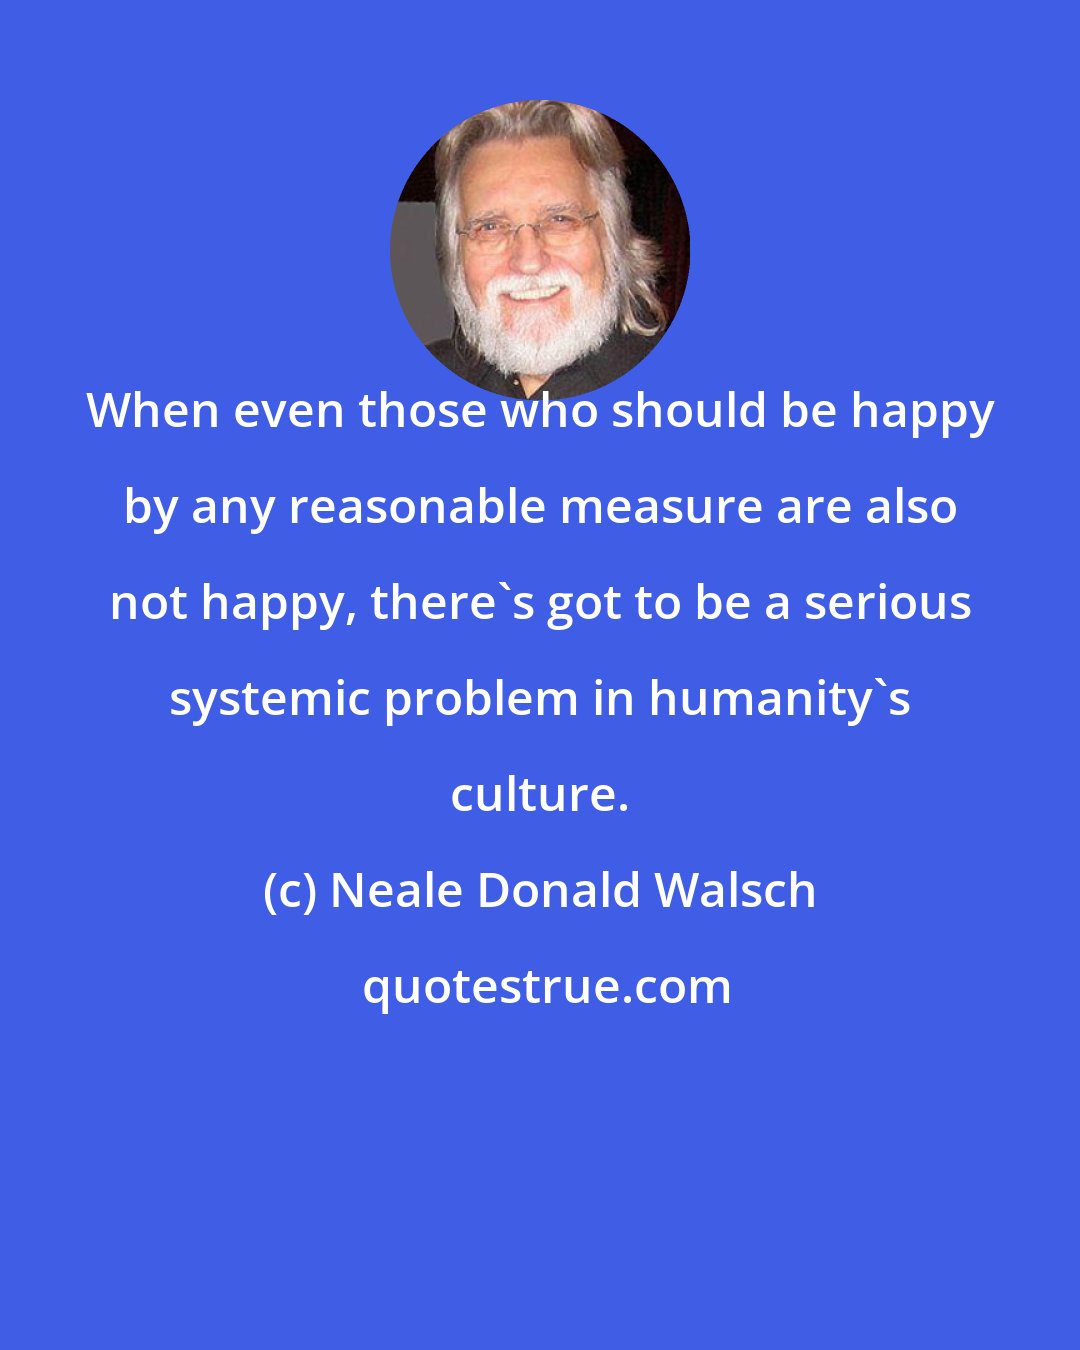 Neale Donald Walsch: When even those who should be happy by any reasonable measure are also not happy, there's got to be a serious systemic problem in humanity's culture.